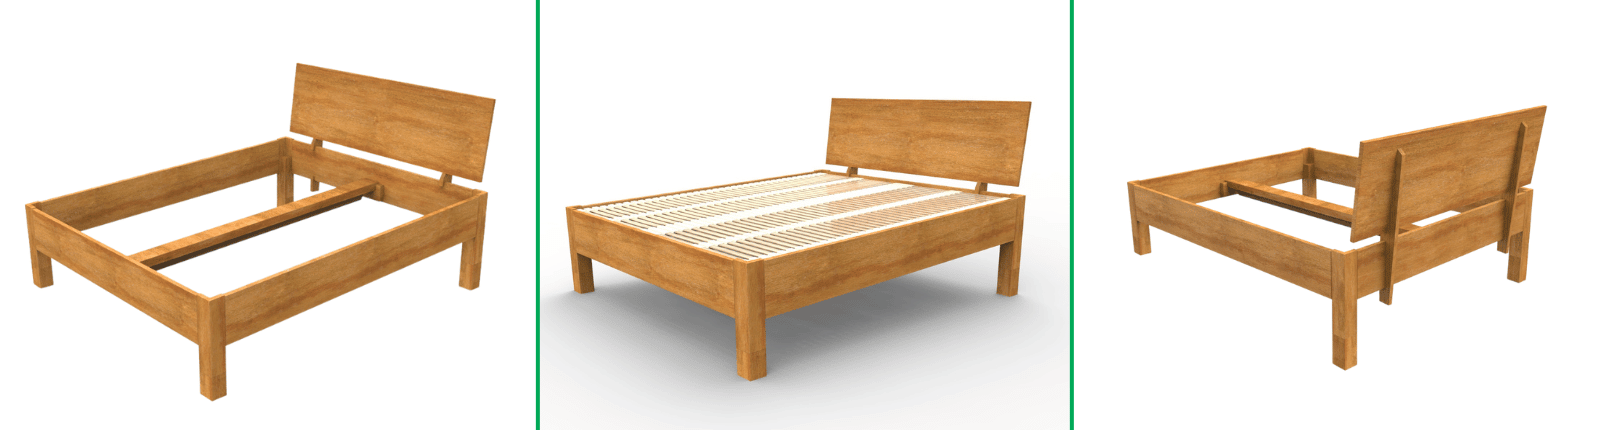 Pummer Inclined Bed Frame in different views